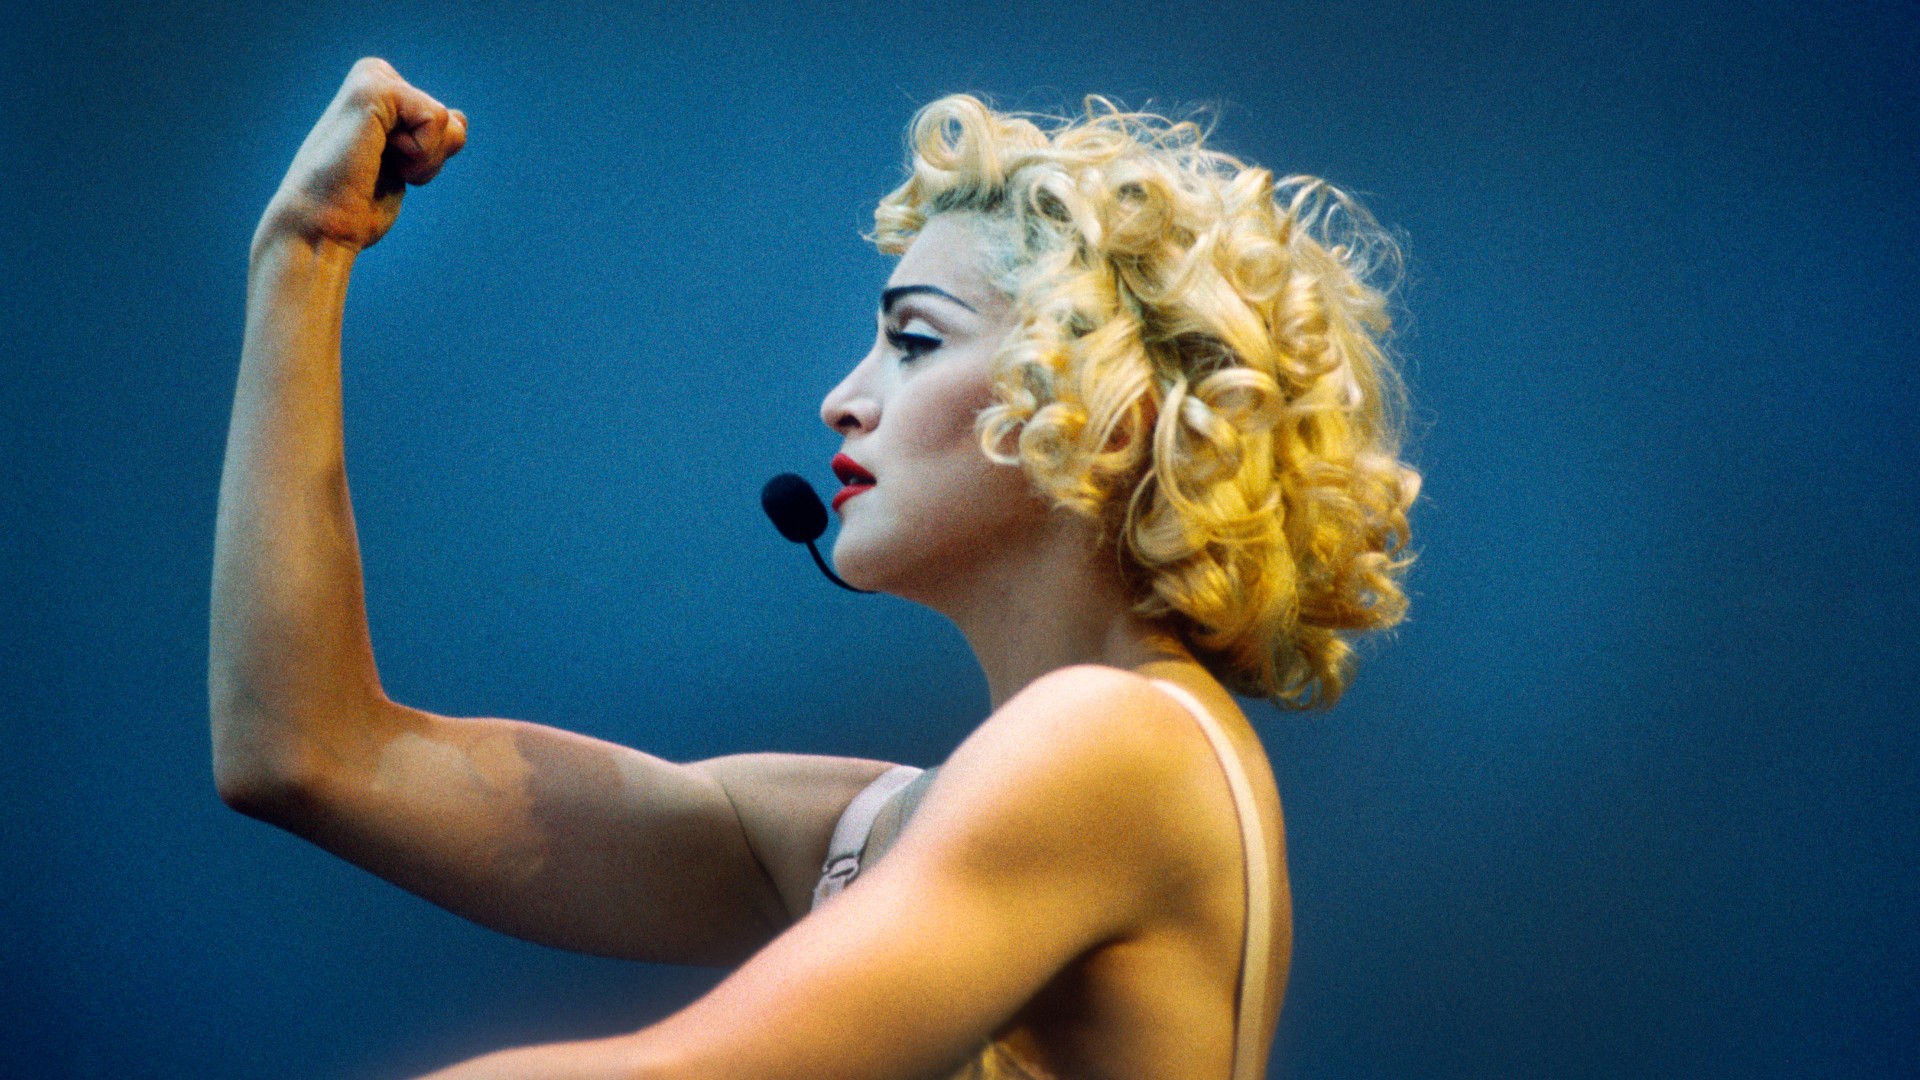 Madonna revisits iconic cone bra while showing off wardrobe